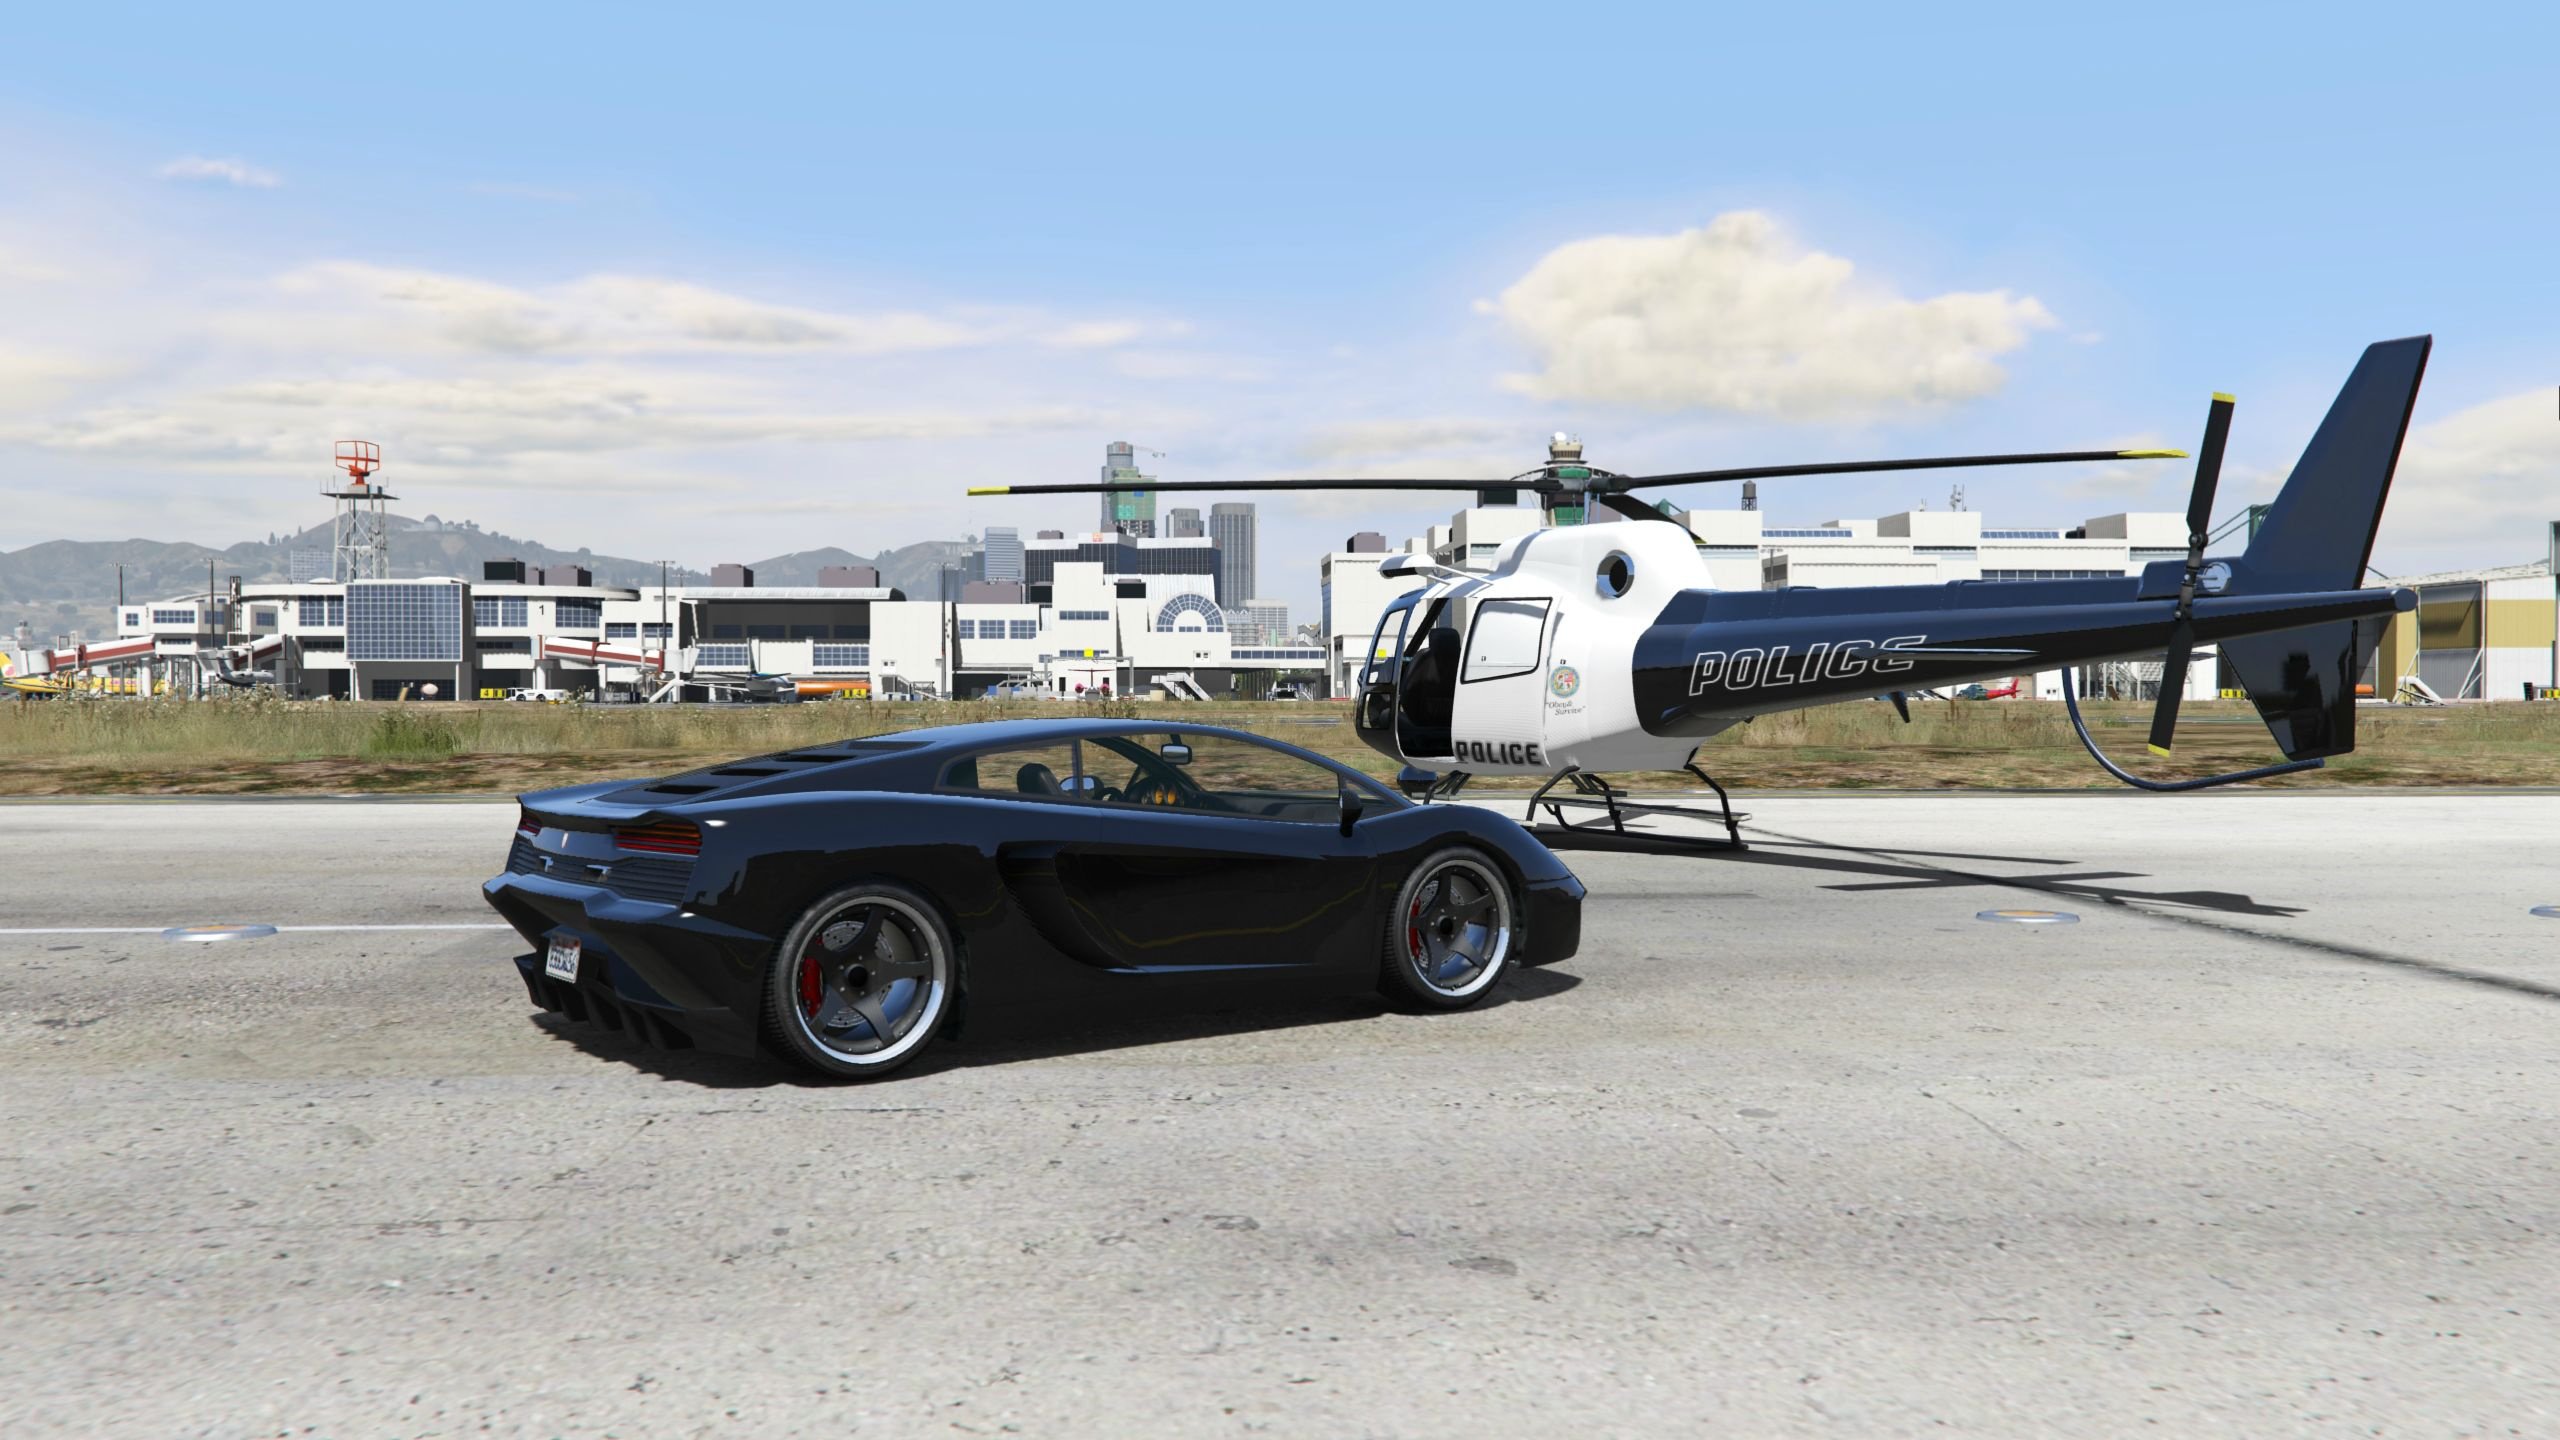 GTA 4 Mod Gives Game Incredible Next-Gen Graphics